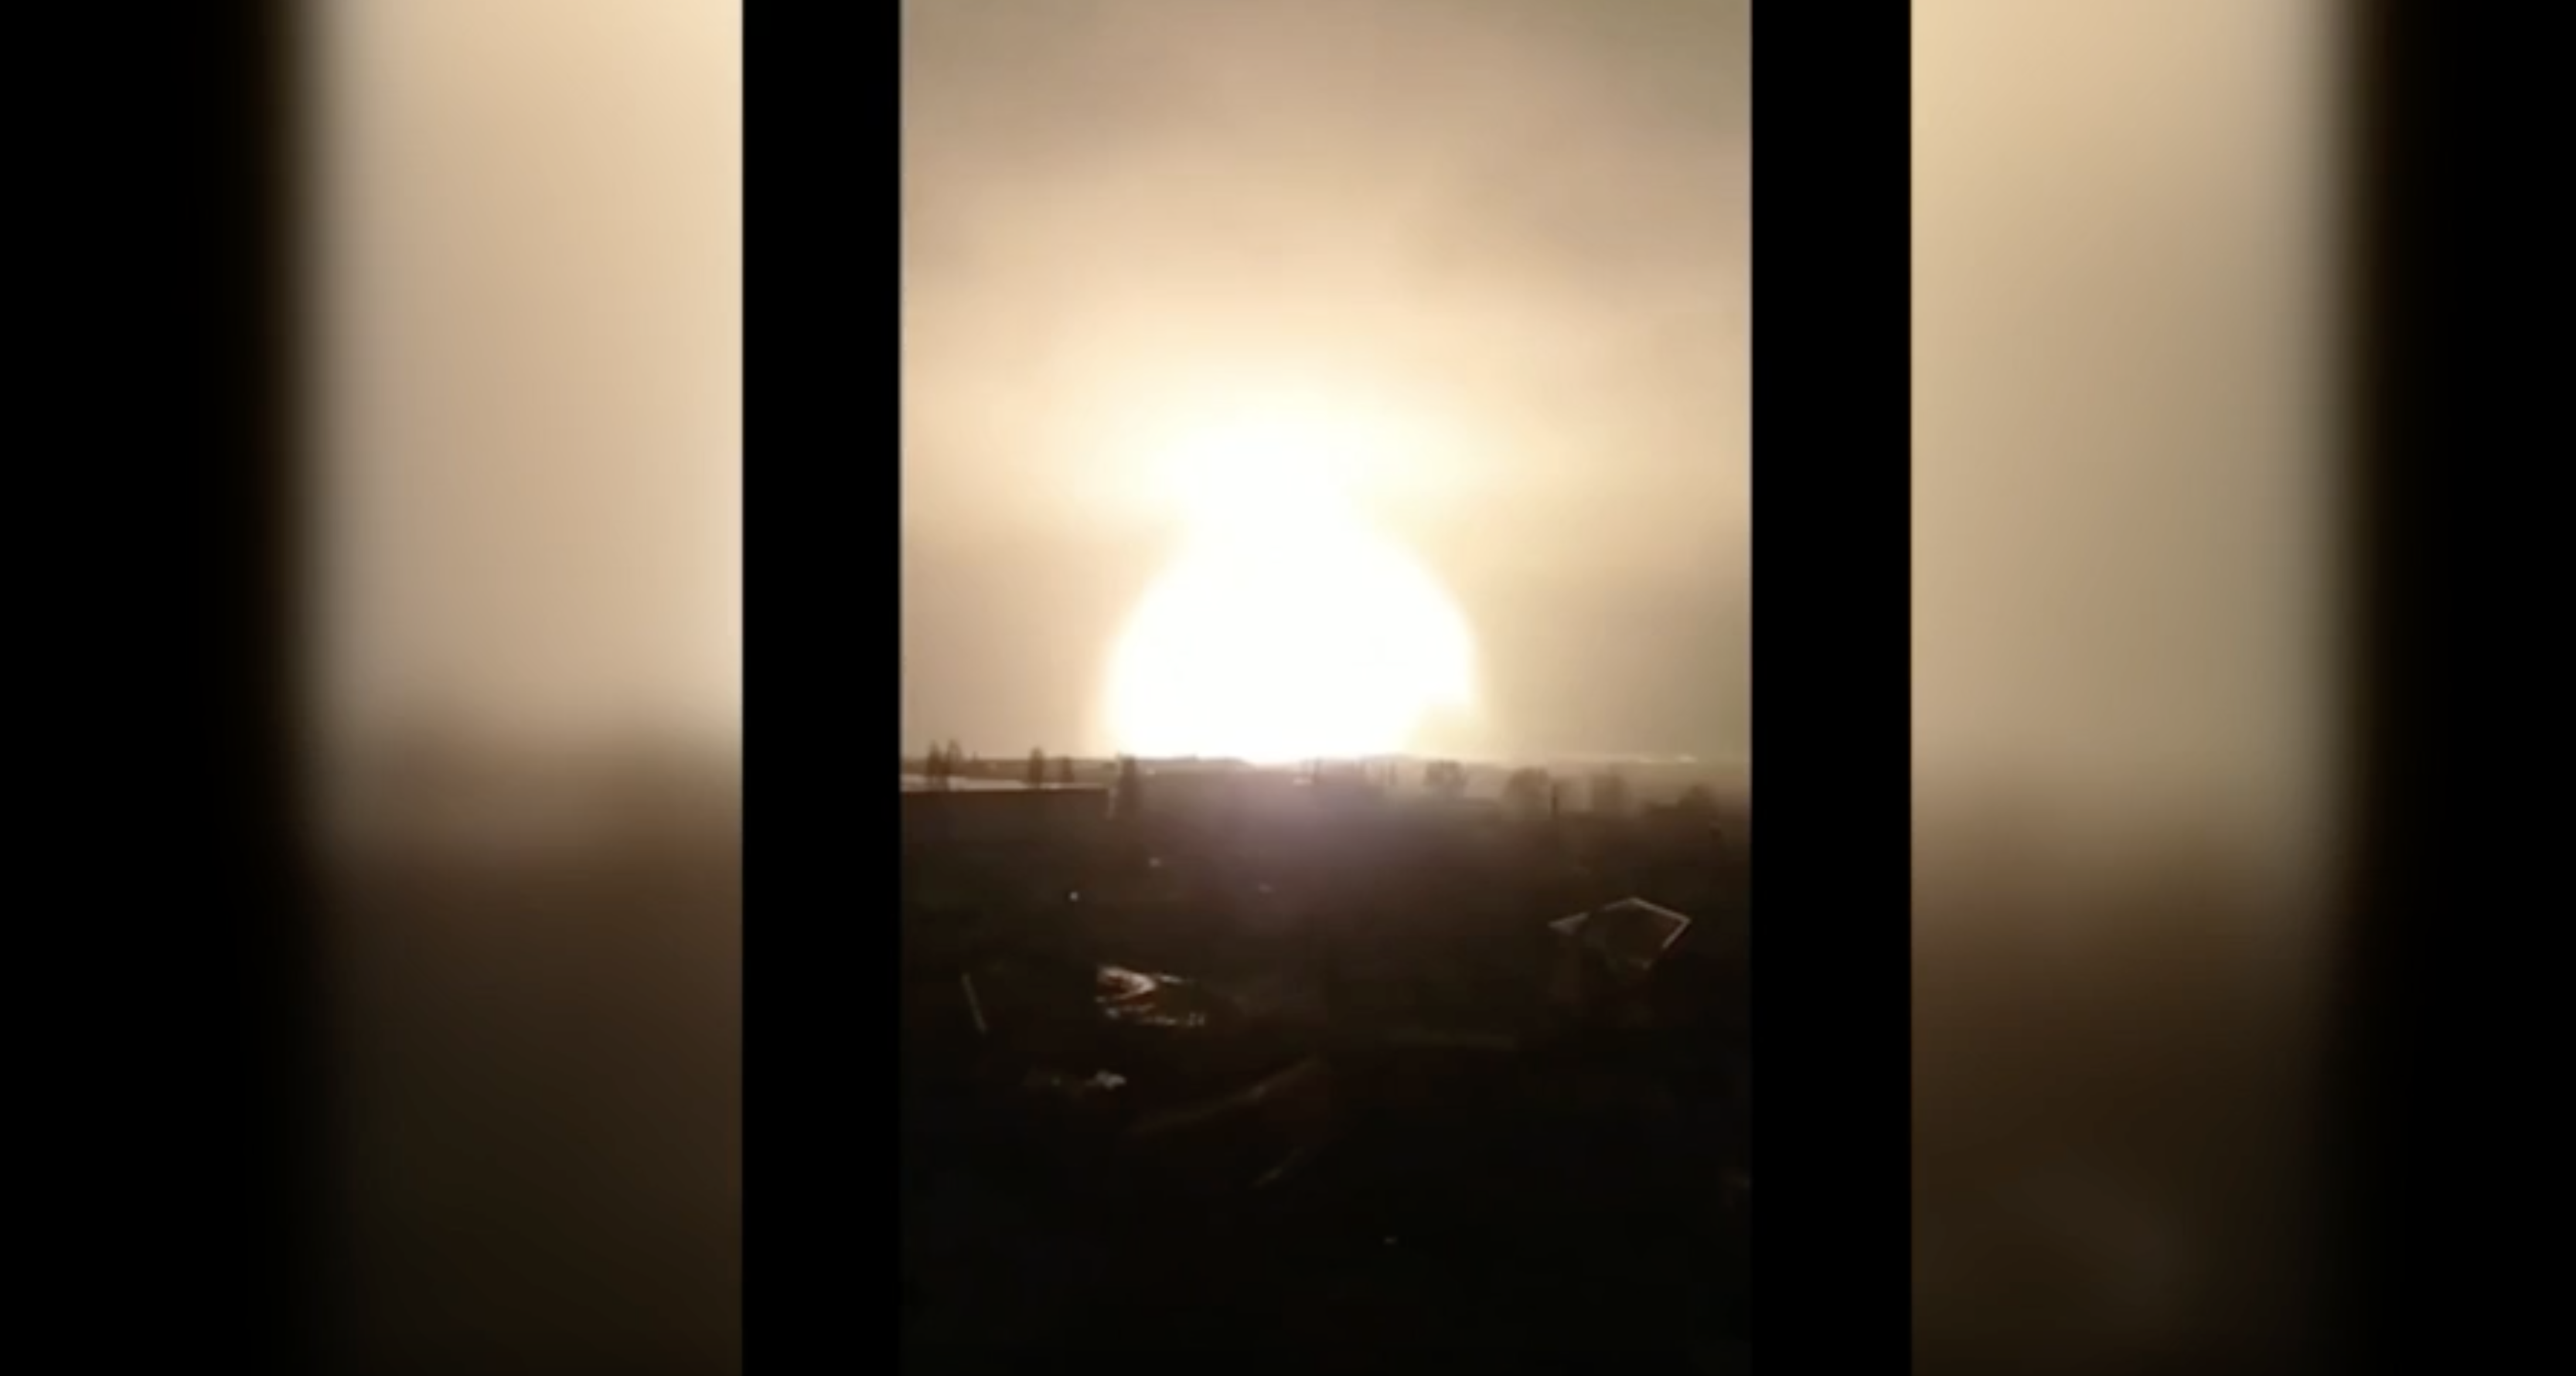 A grab from a video published by ТРУХА, a local Kharkiv news outlet, shows a massive explosion and shockwave seen from the upper floor of a residential building on March 2.